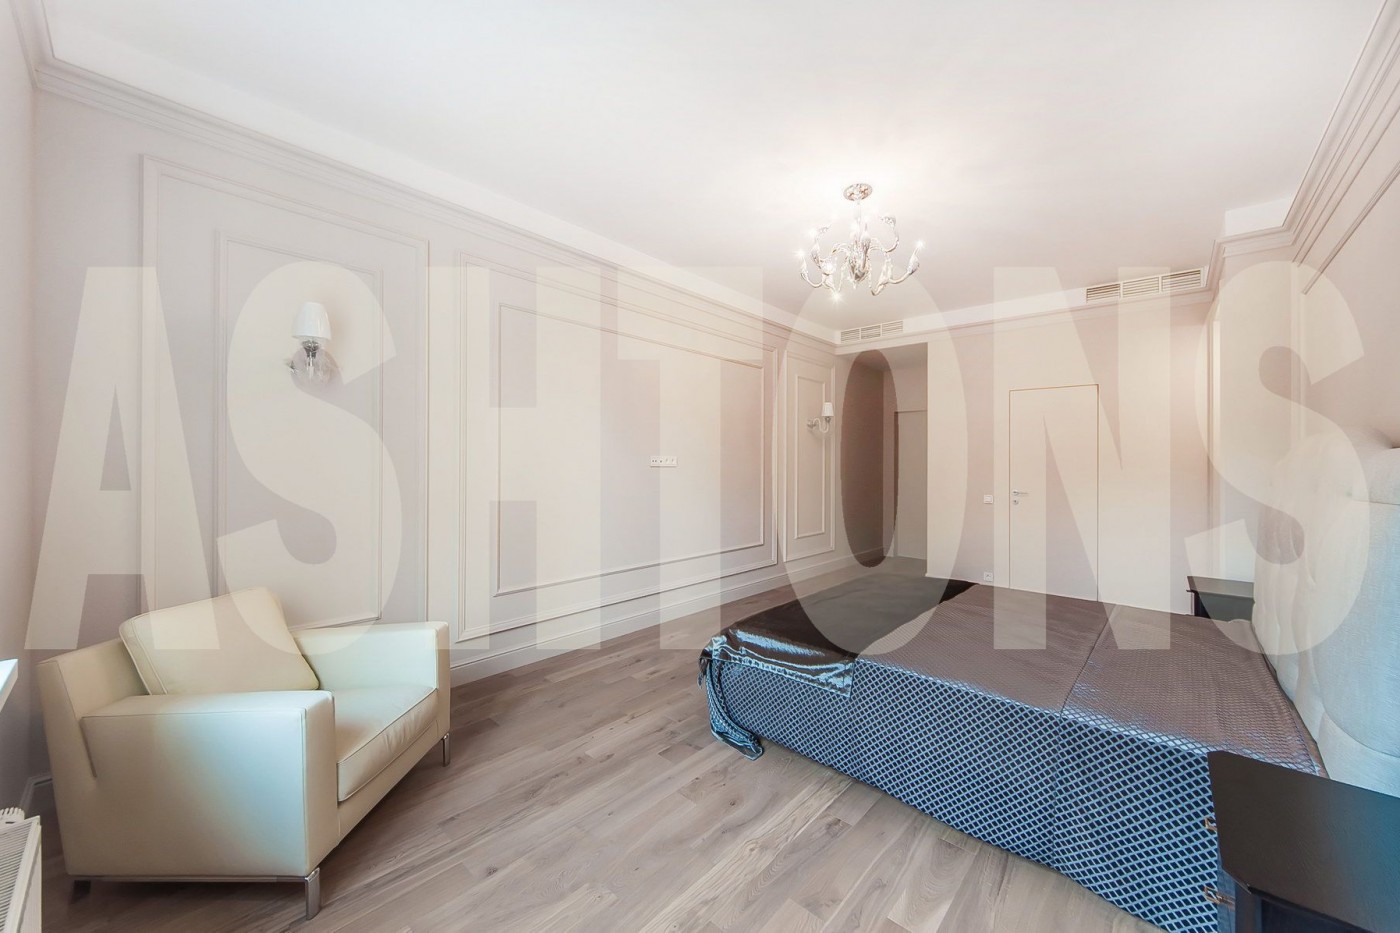 Apartment for rent in elite Residential Complex "Sytinsky" on Bogoslovsky Lane, building 12A at the Patriarch's Ponds by real estate agency ASHTONS INTERNATIONAL REALTY